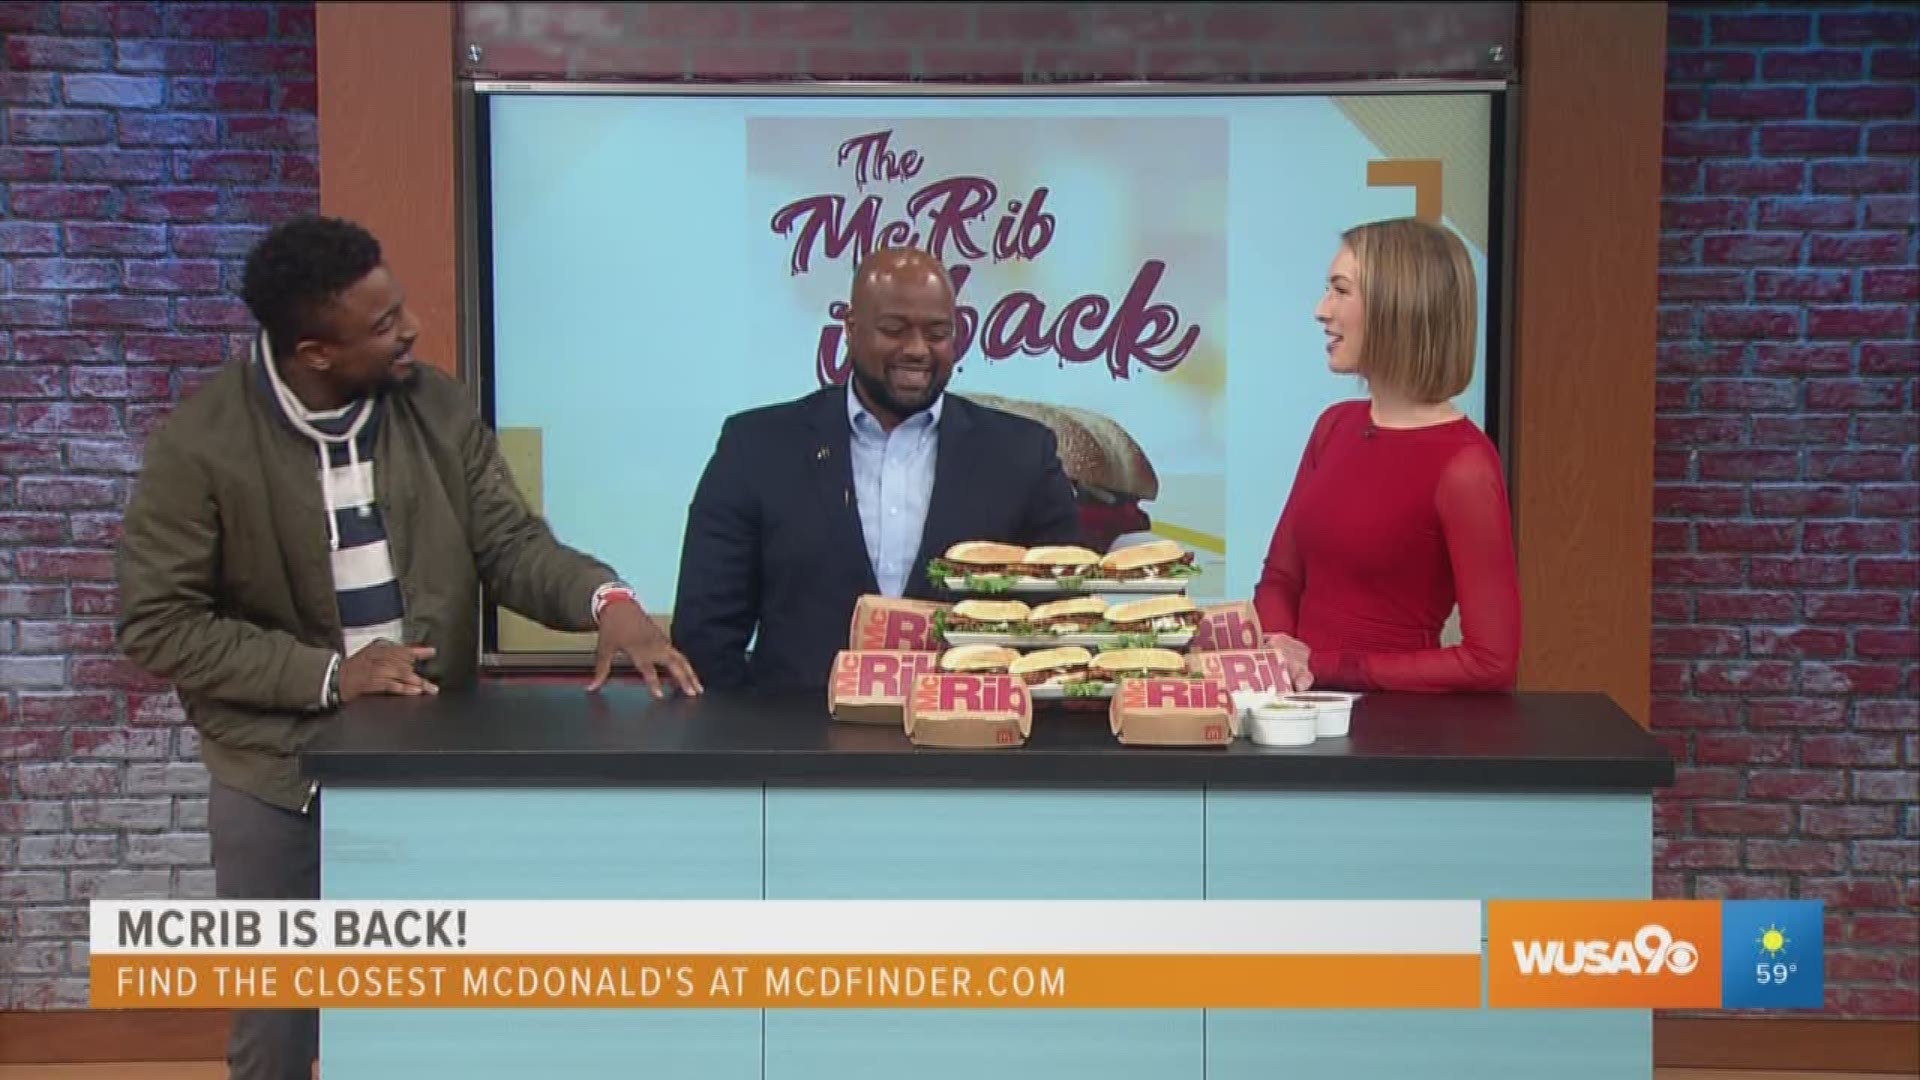 McDonald's Owner/Operator Mike Bland talked with Ellen and Tevin about community involvement and the return of the McRib. This segment is sponsored by McDonald's.